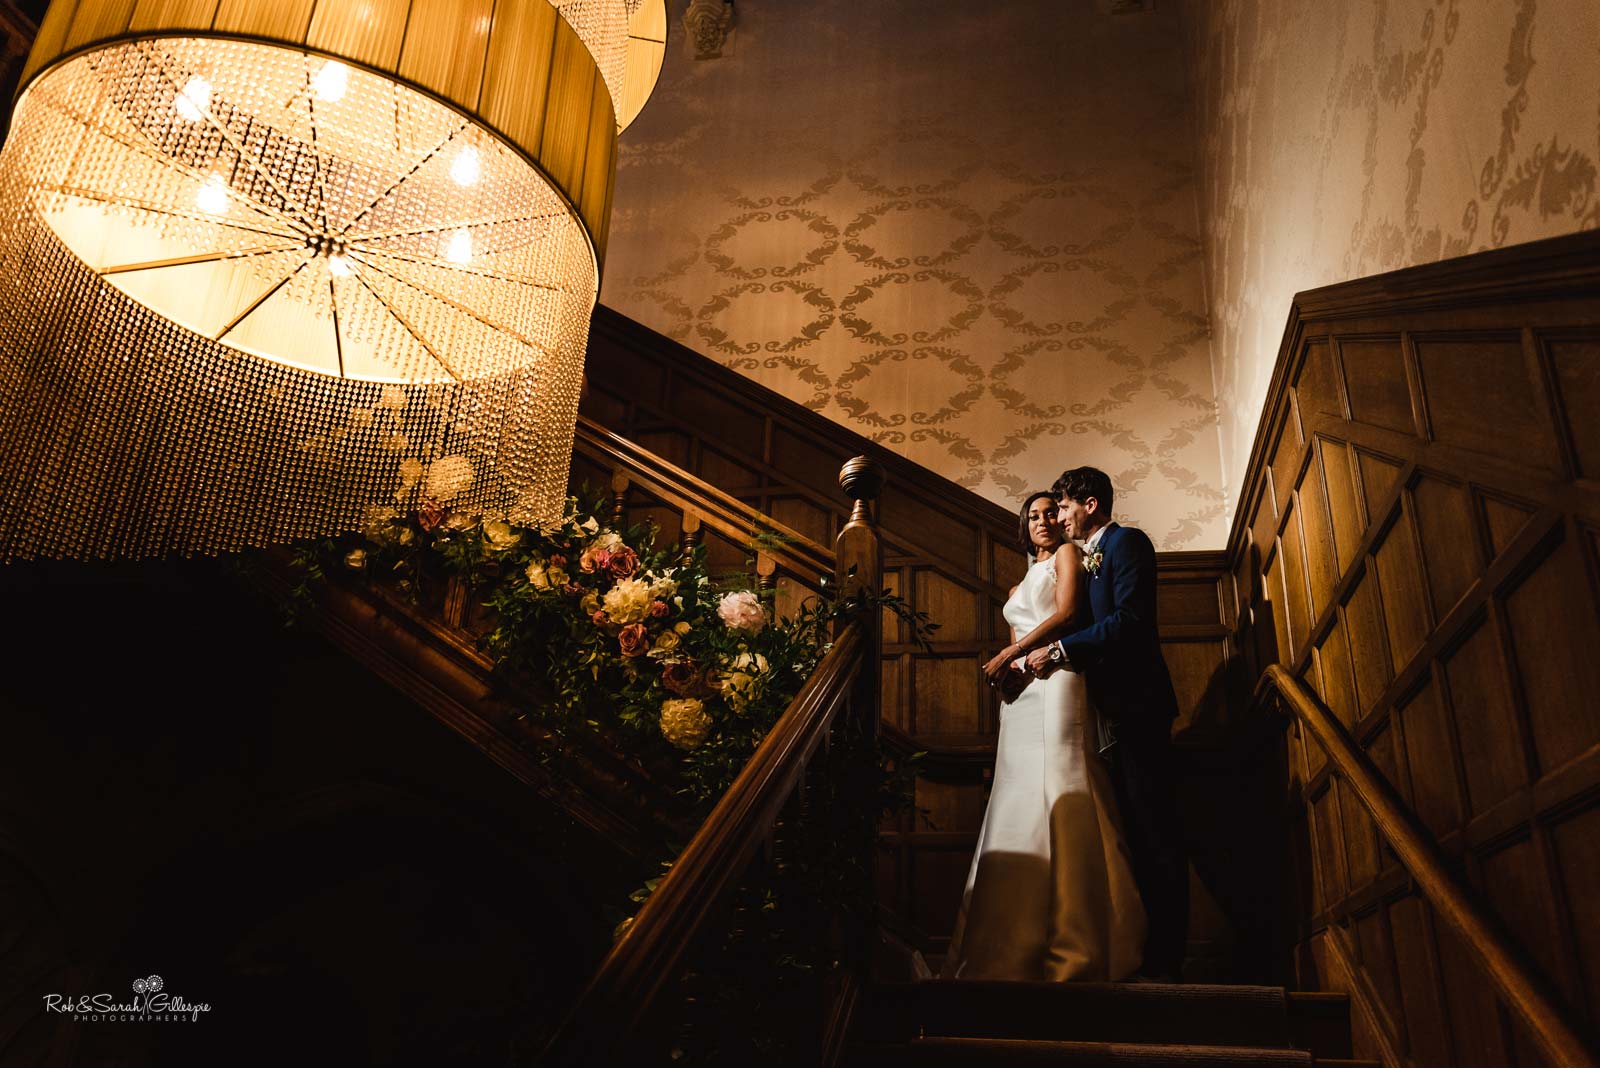 Hampton Manor staircase with bride and groom